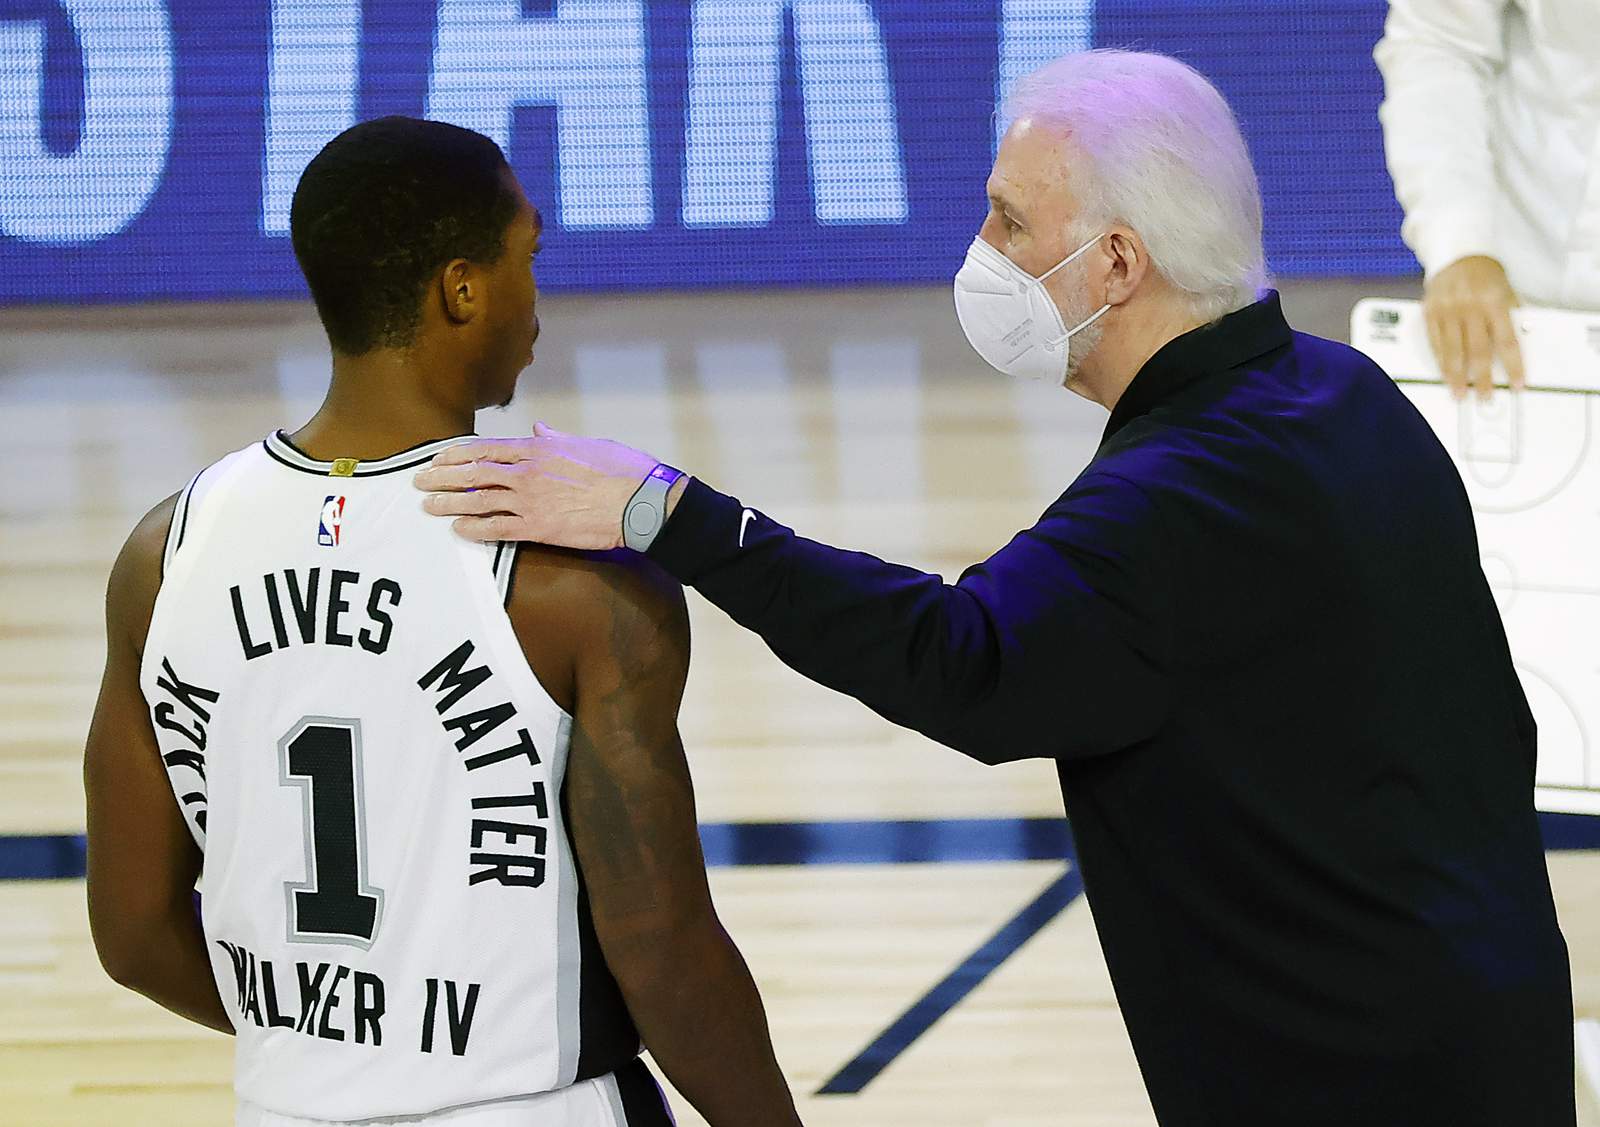 ‘We think about ourselves more than the group:’ Gregg Popovich blasts anti-maskers amid COVID-19 spread